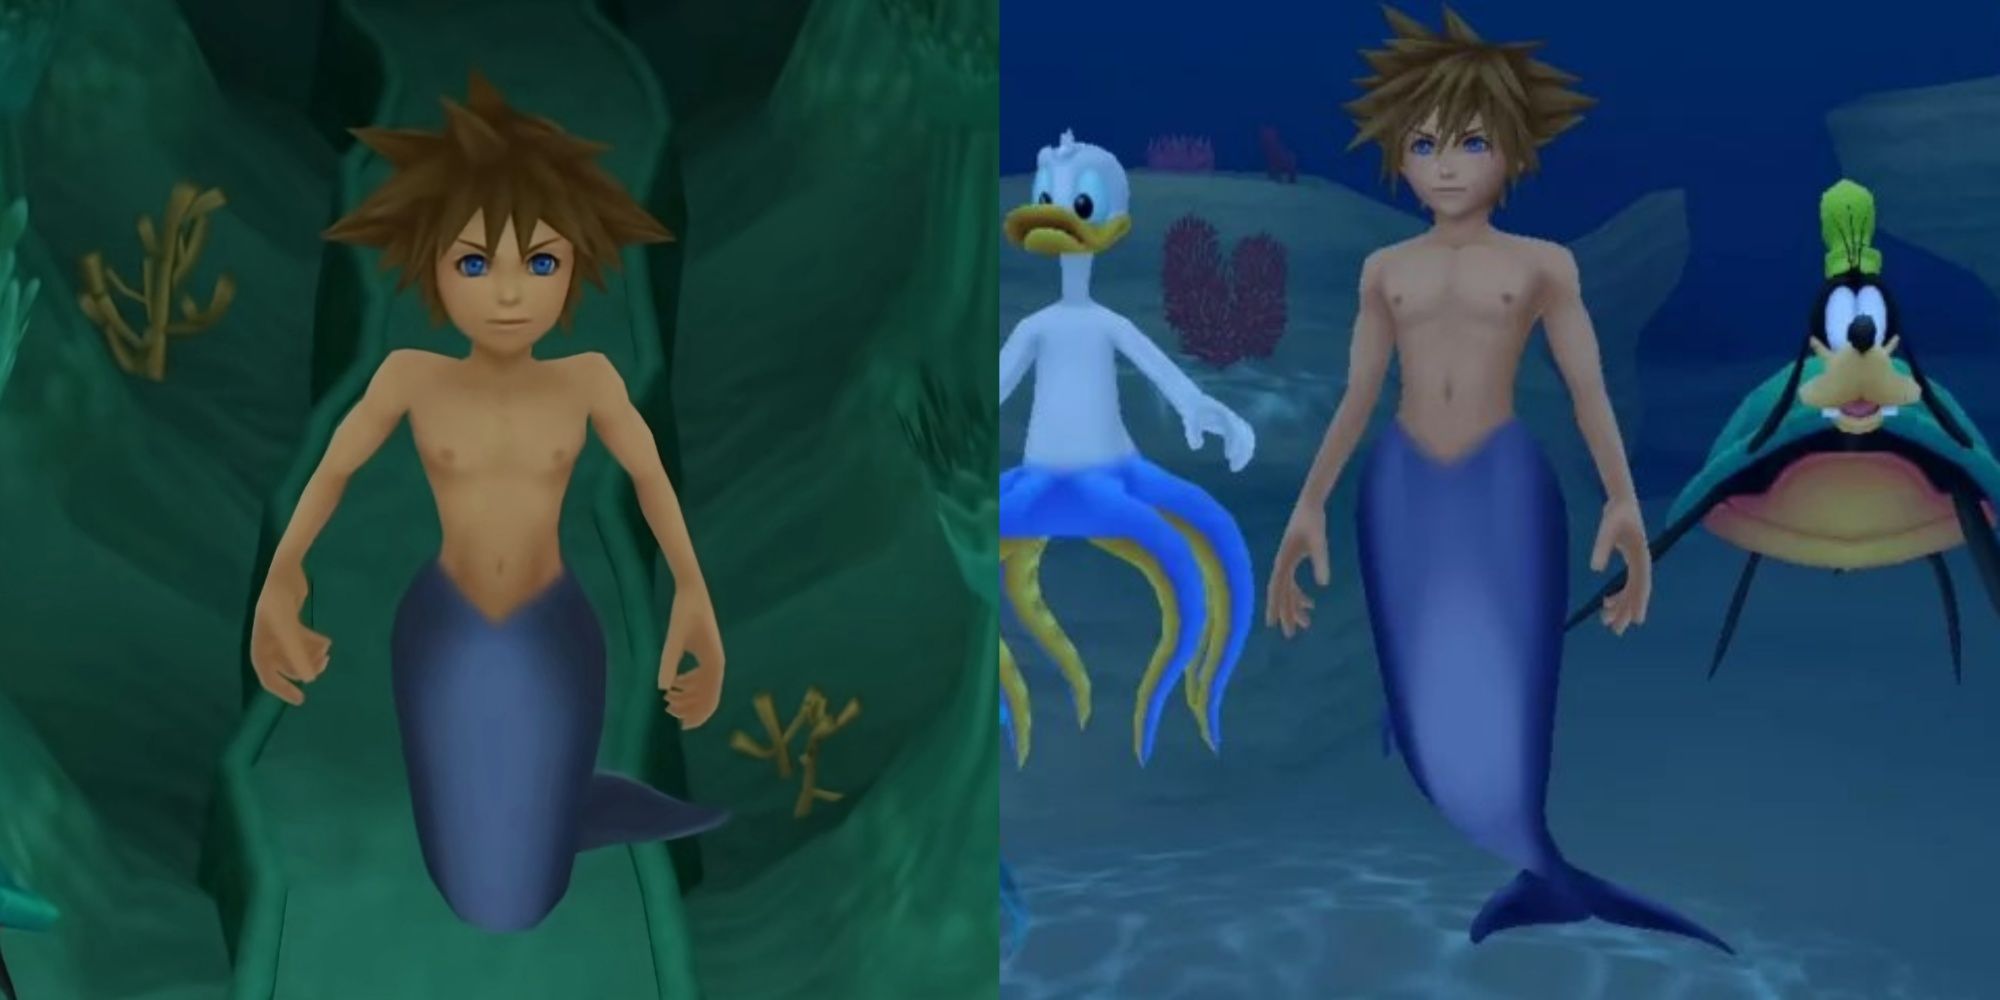 Sora as a mermaid in Kingdom Hearts 1 and 2